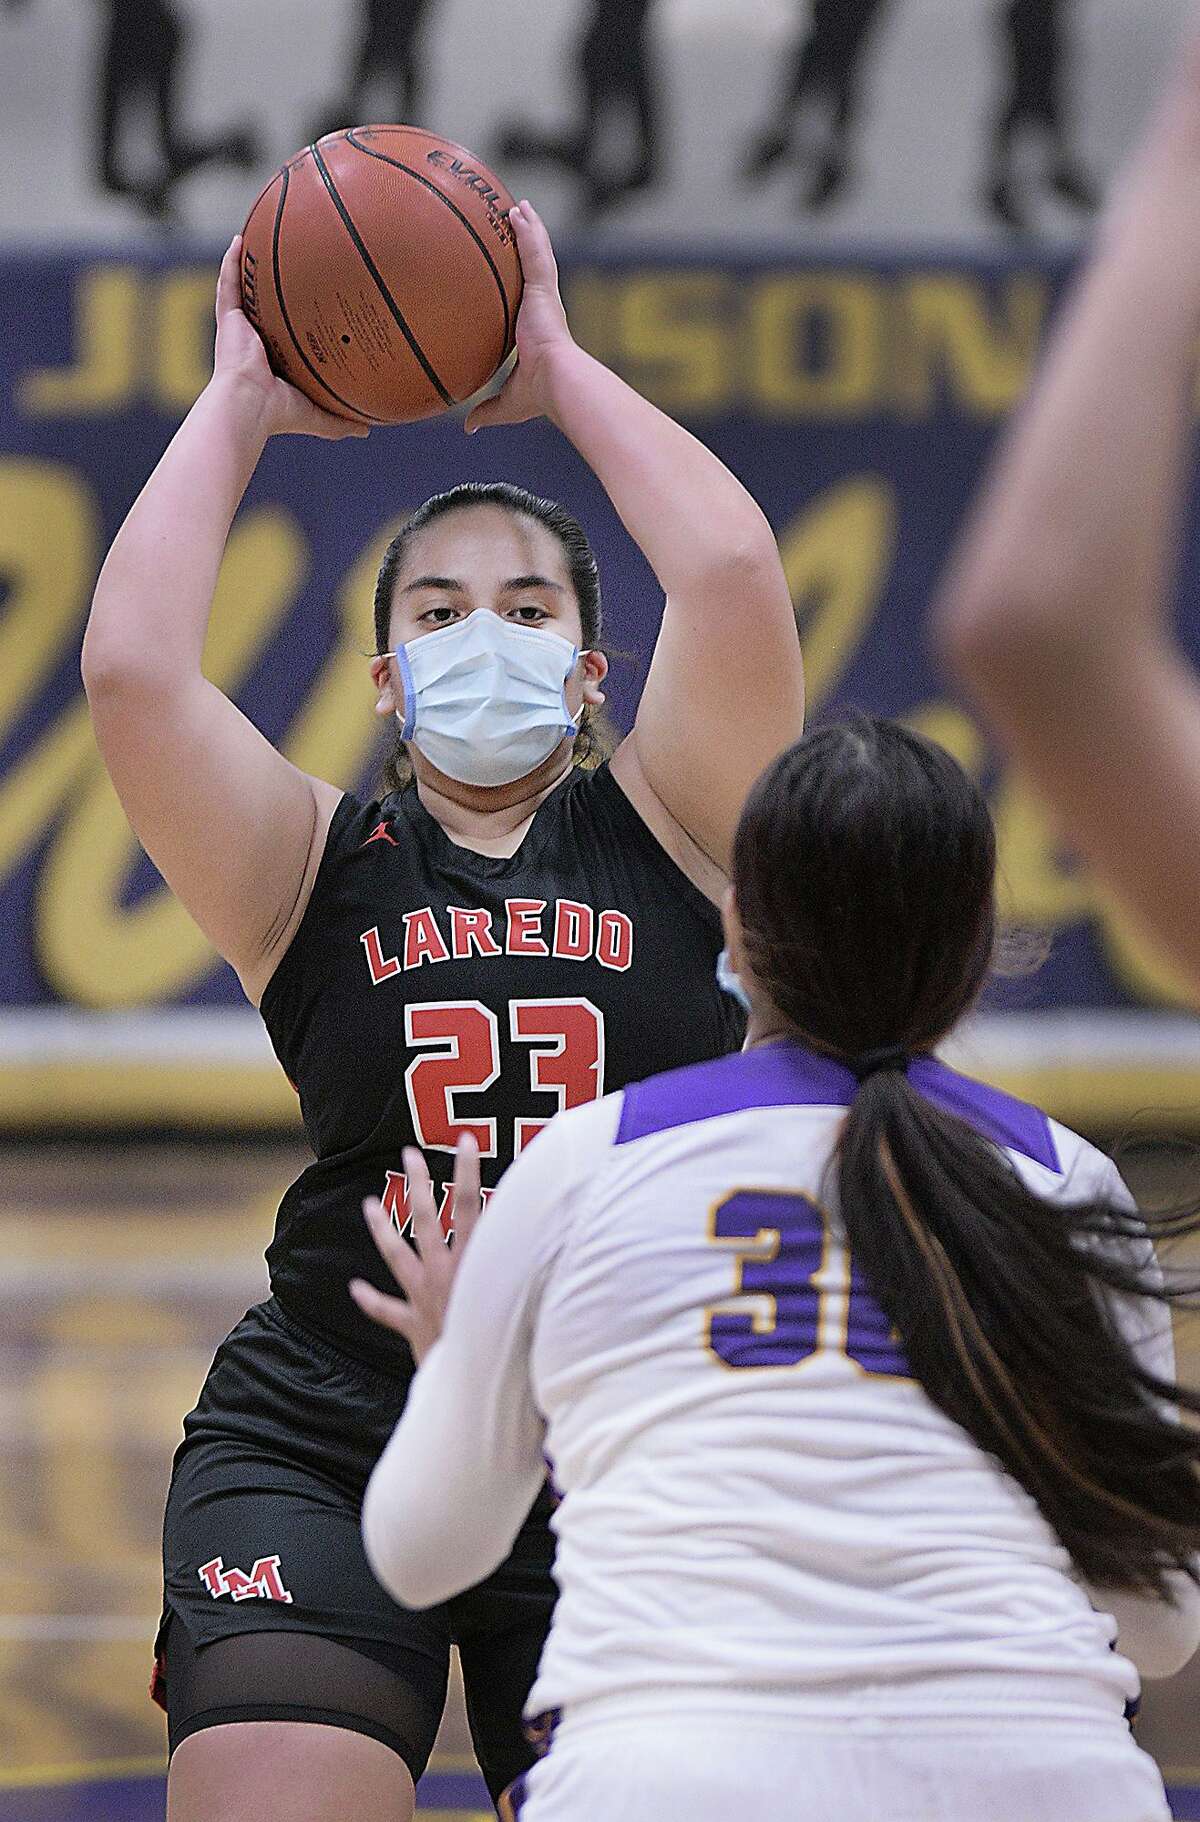 Briana Palacios and Martin rallied to win 41-39 at LBJ on Tuesday in their season opener.